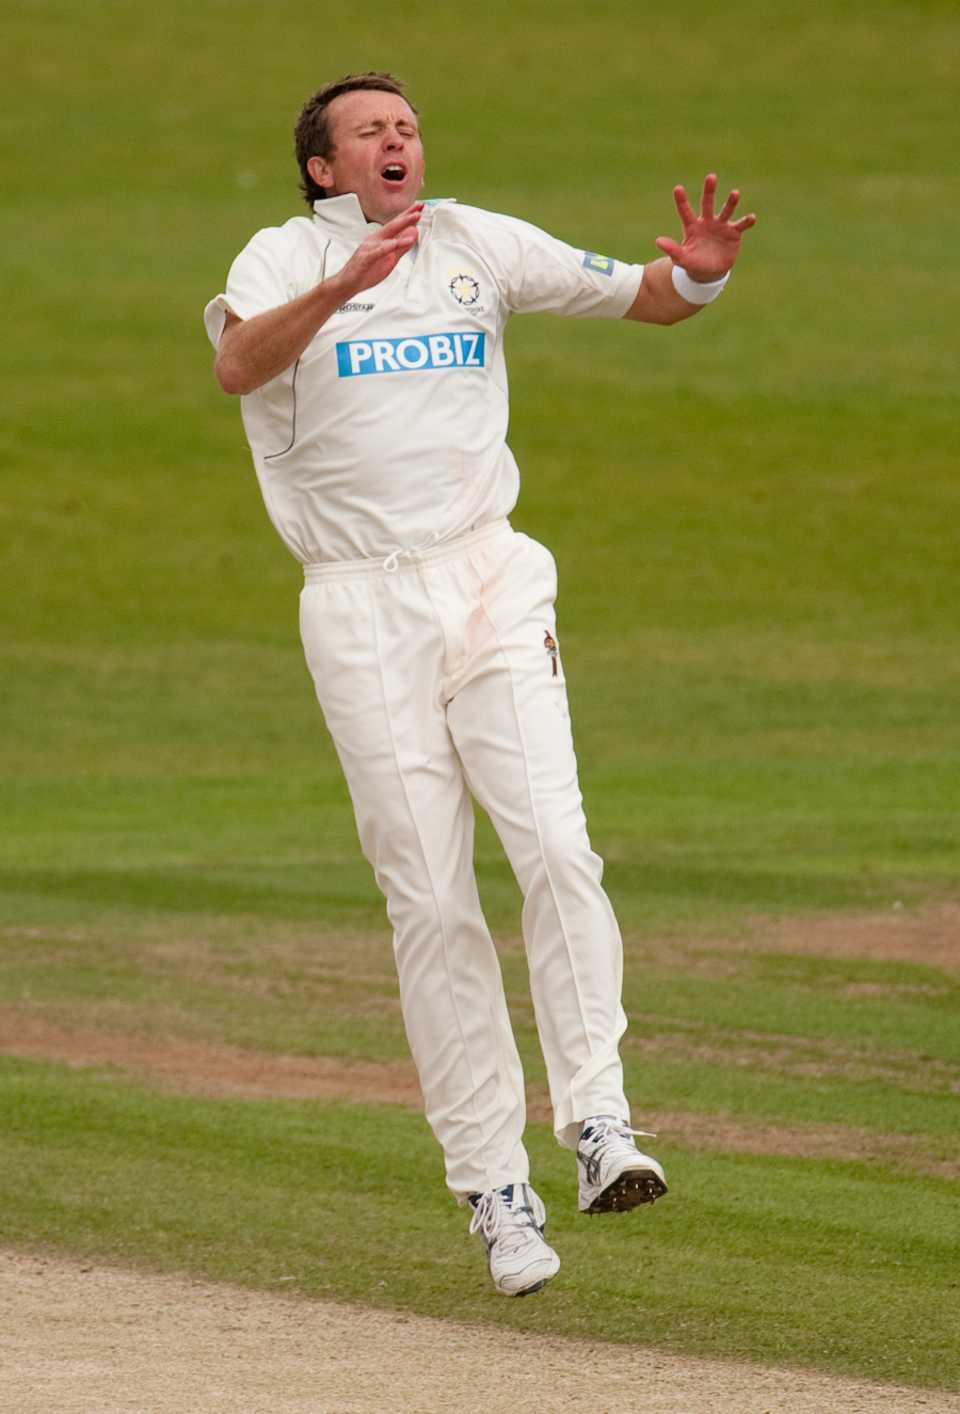 Dominic Cork reacts to a near miss against Yorkshire, Yorkshire v Hampshire, County Championship Division One, Headingley, 3rd day, May 13 2011